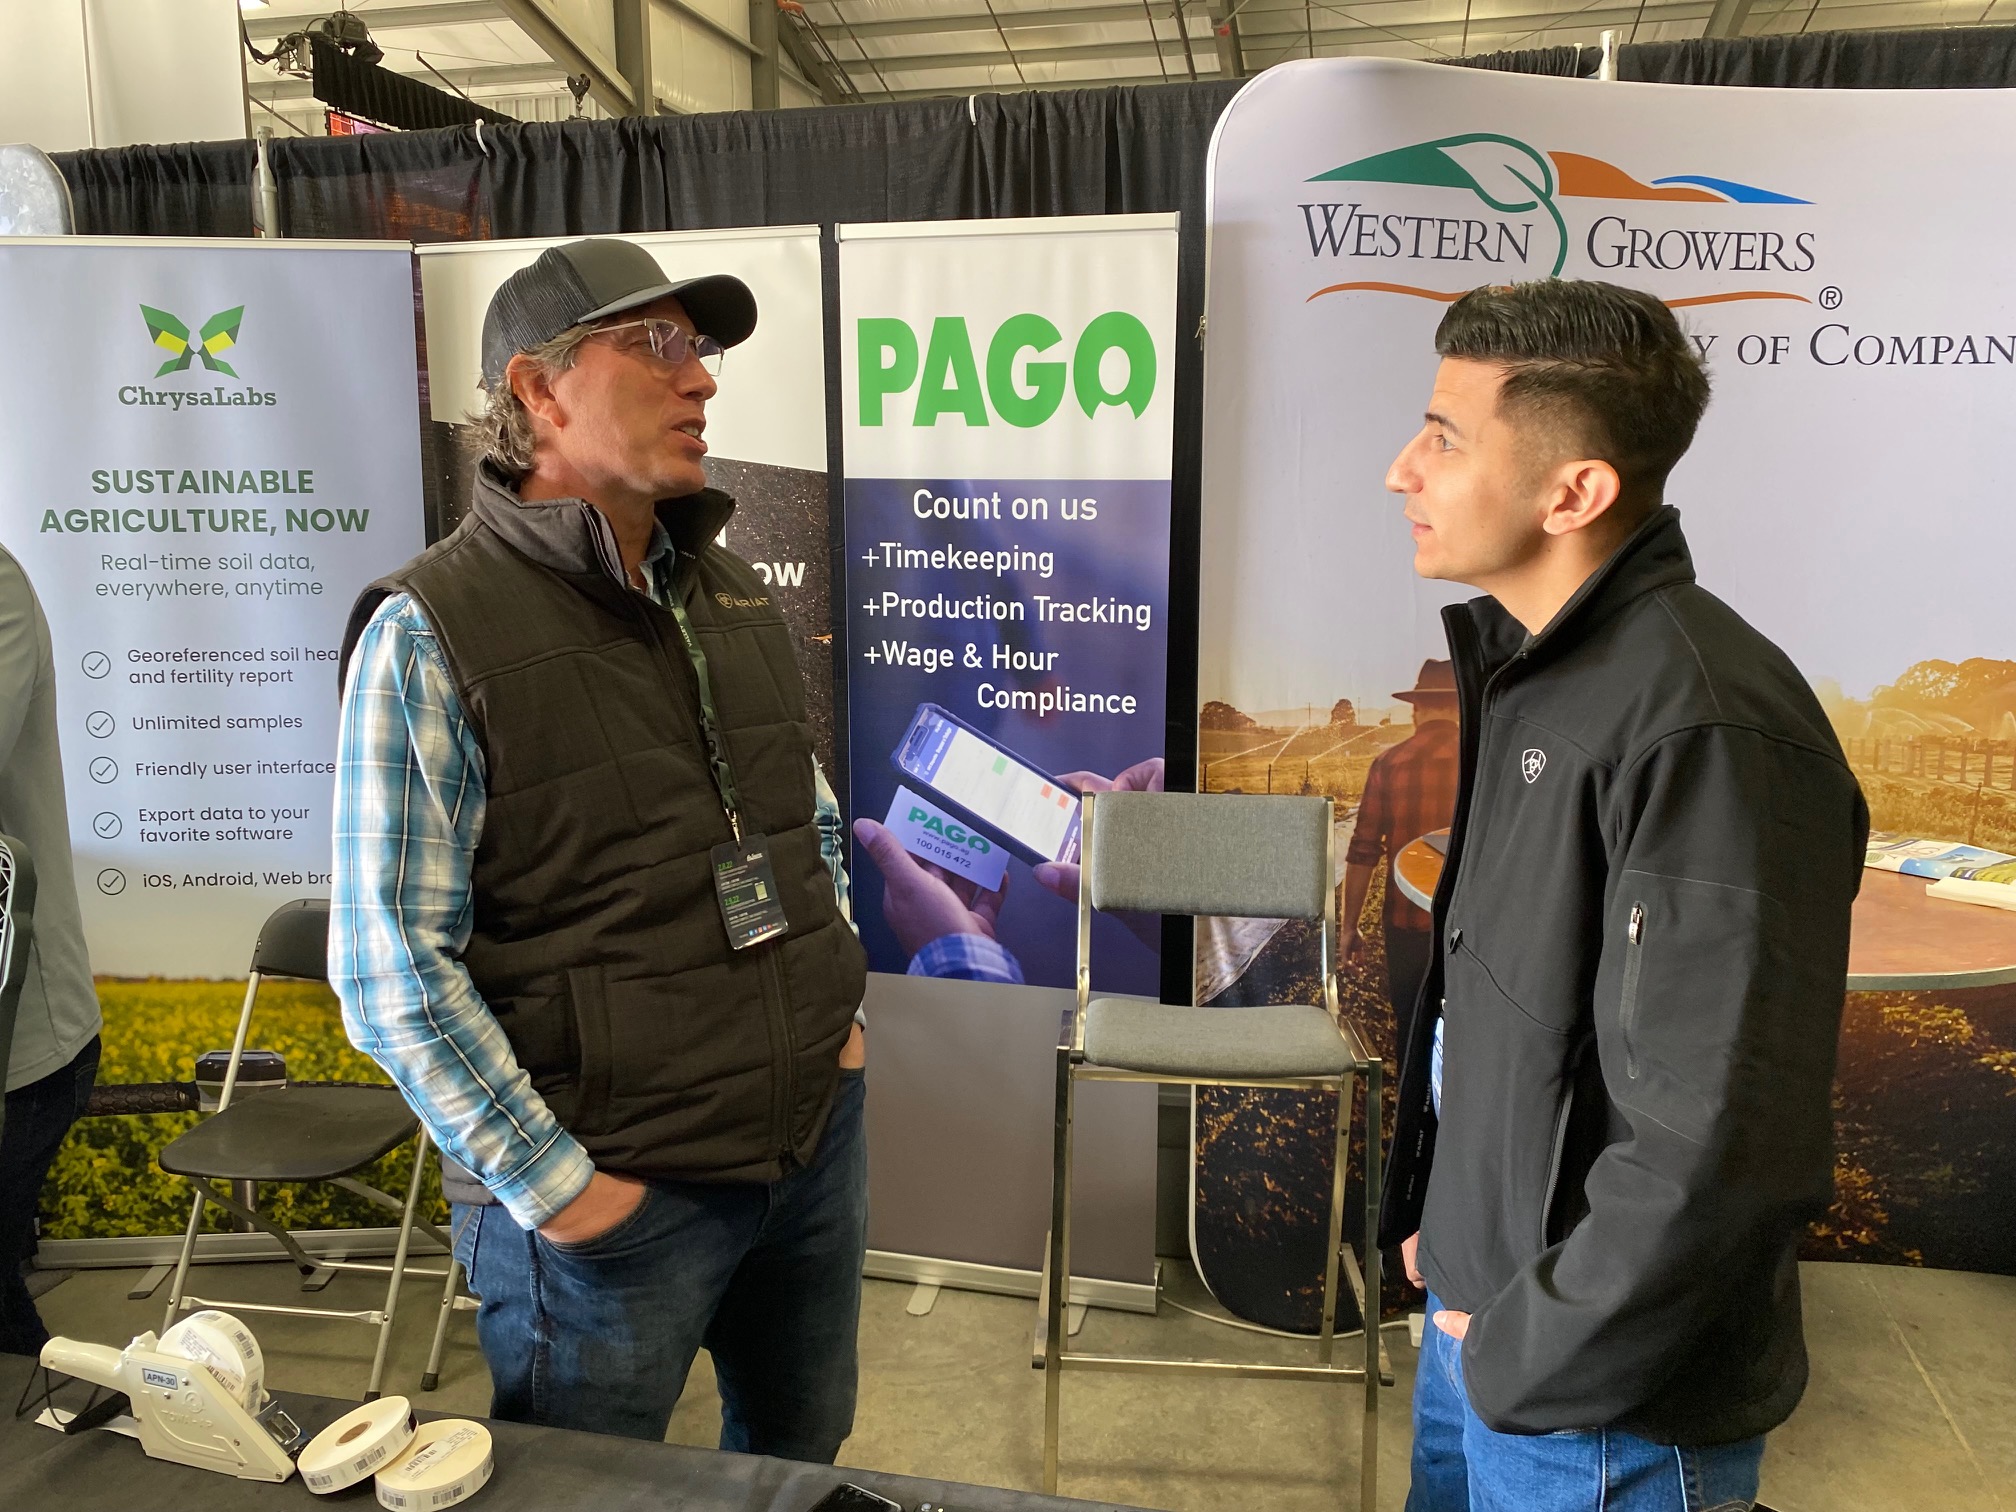  Mike Dodson, CEO of Pago talks to one of his developers about a recent meeting with growers. Pago manages timekeeping, production tracking and wage compliance for growers and farm labor contractors. 